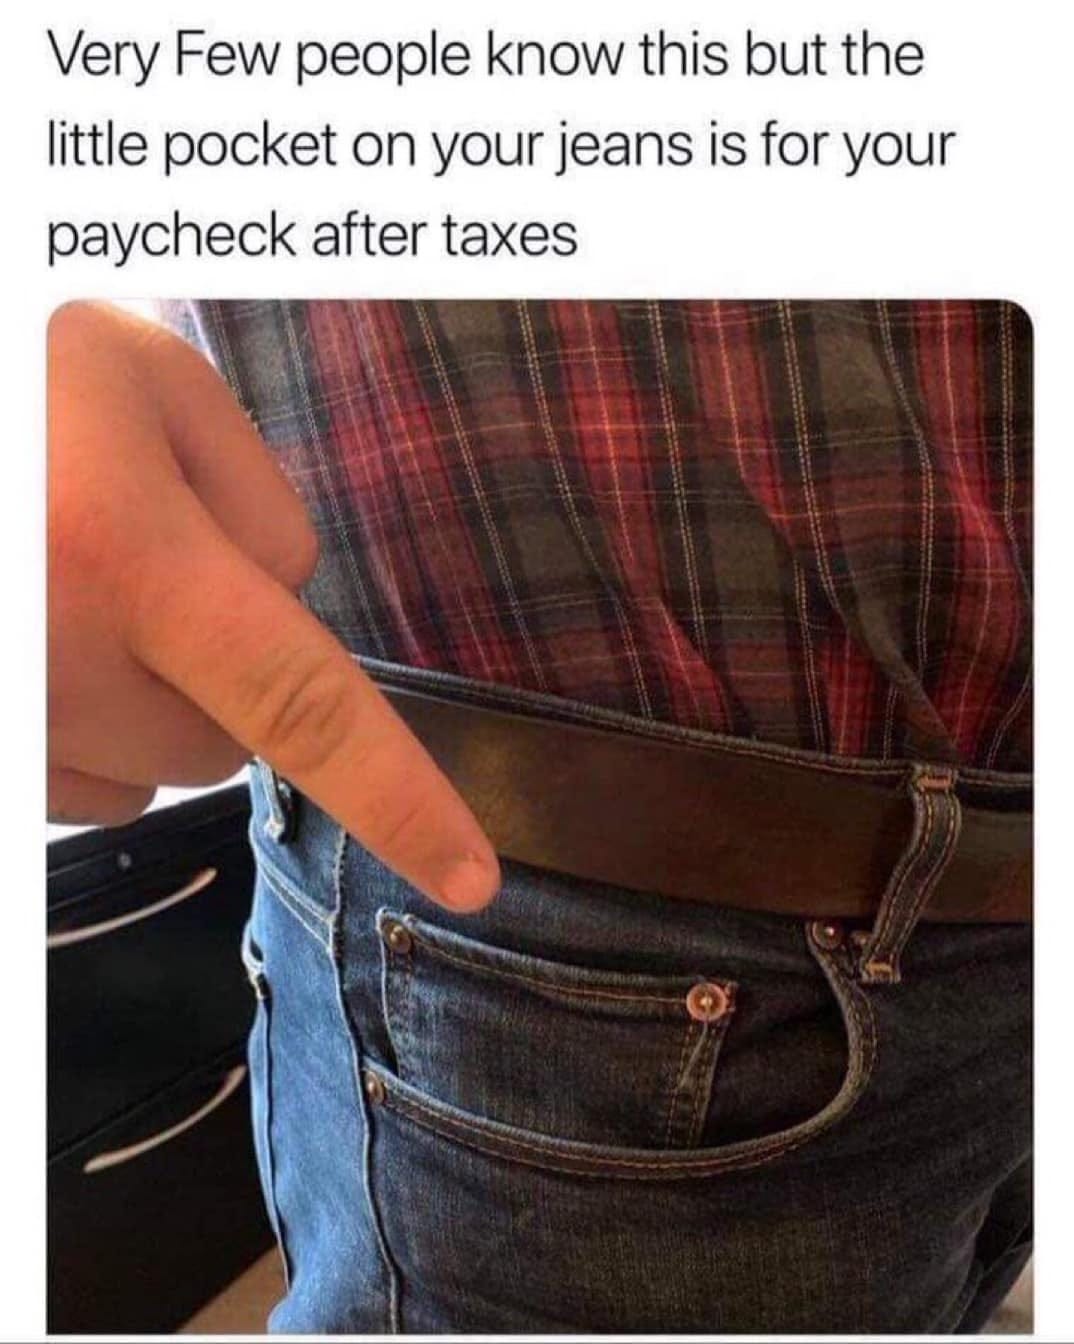 May be an image of 1 person and text that says 'Very Few people know this but the little pocket on your jeans is for your paycheck after taxes'